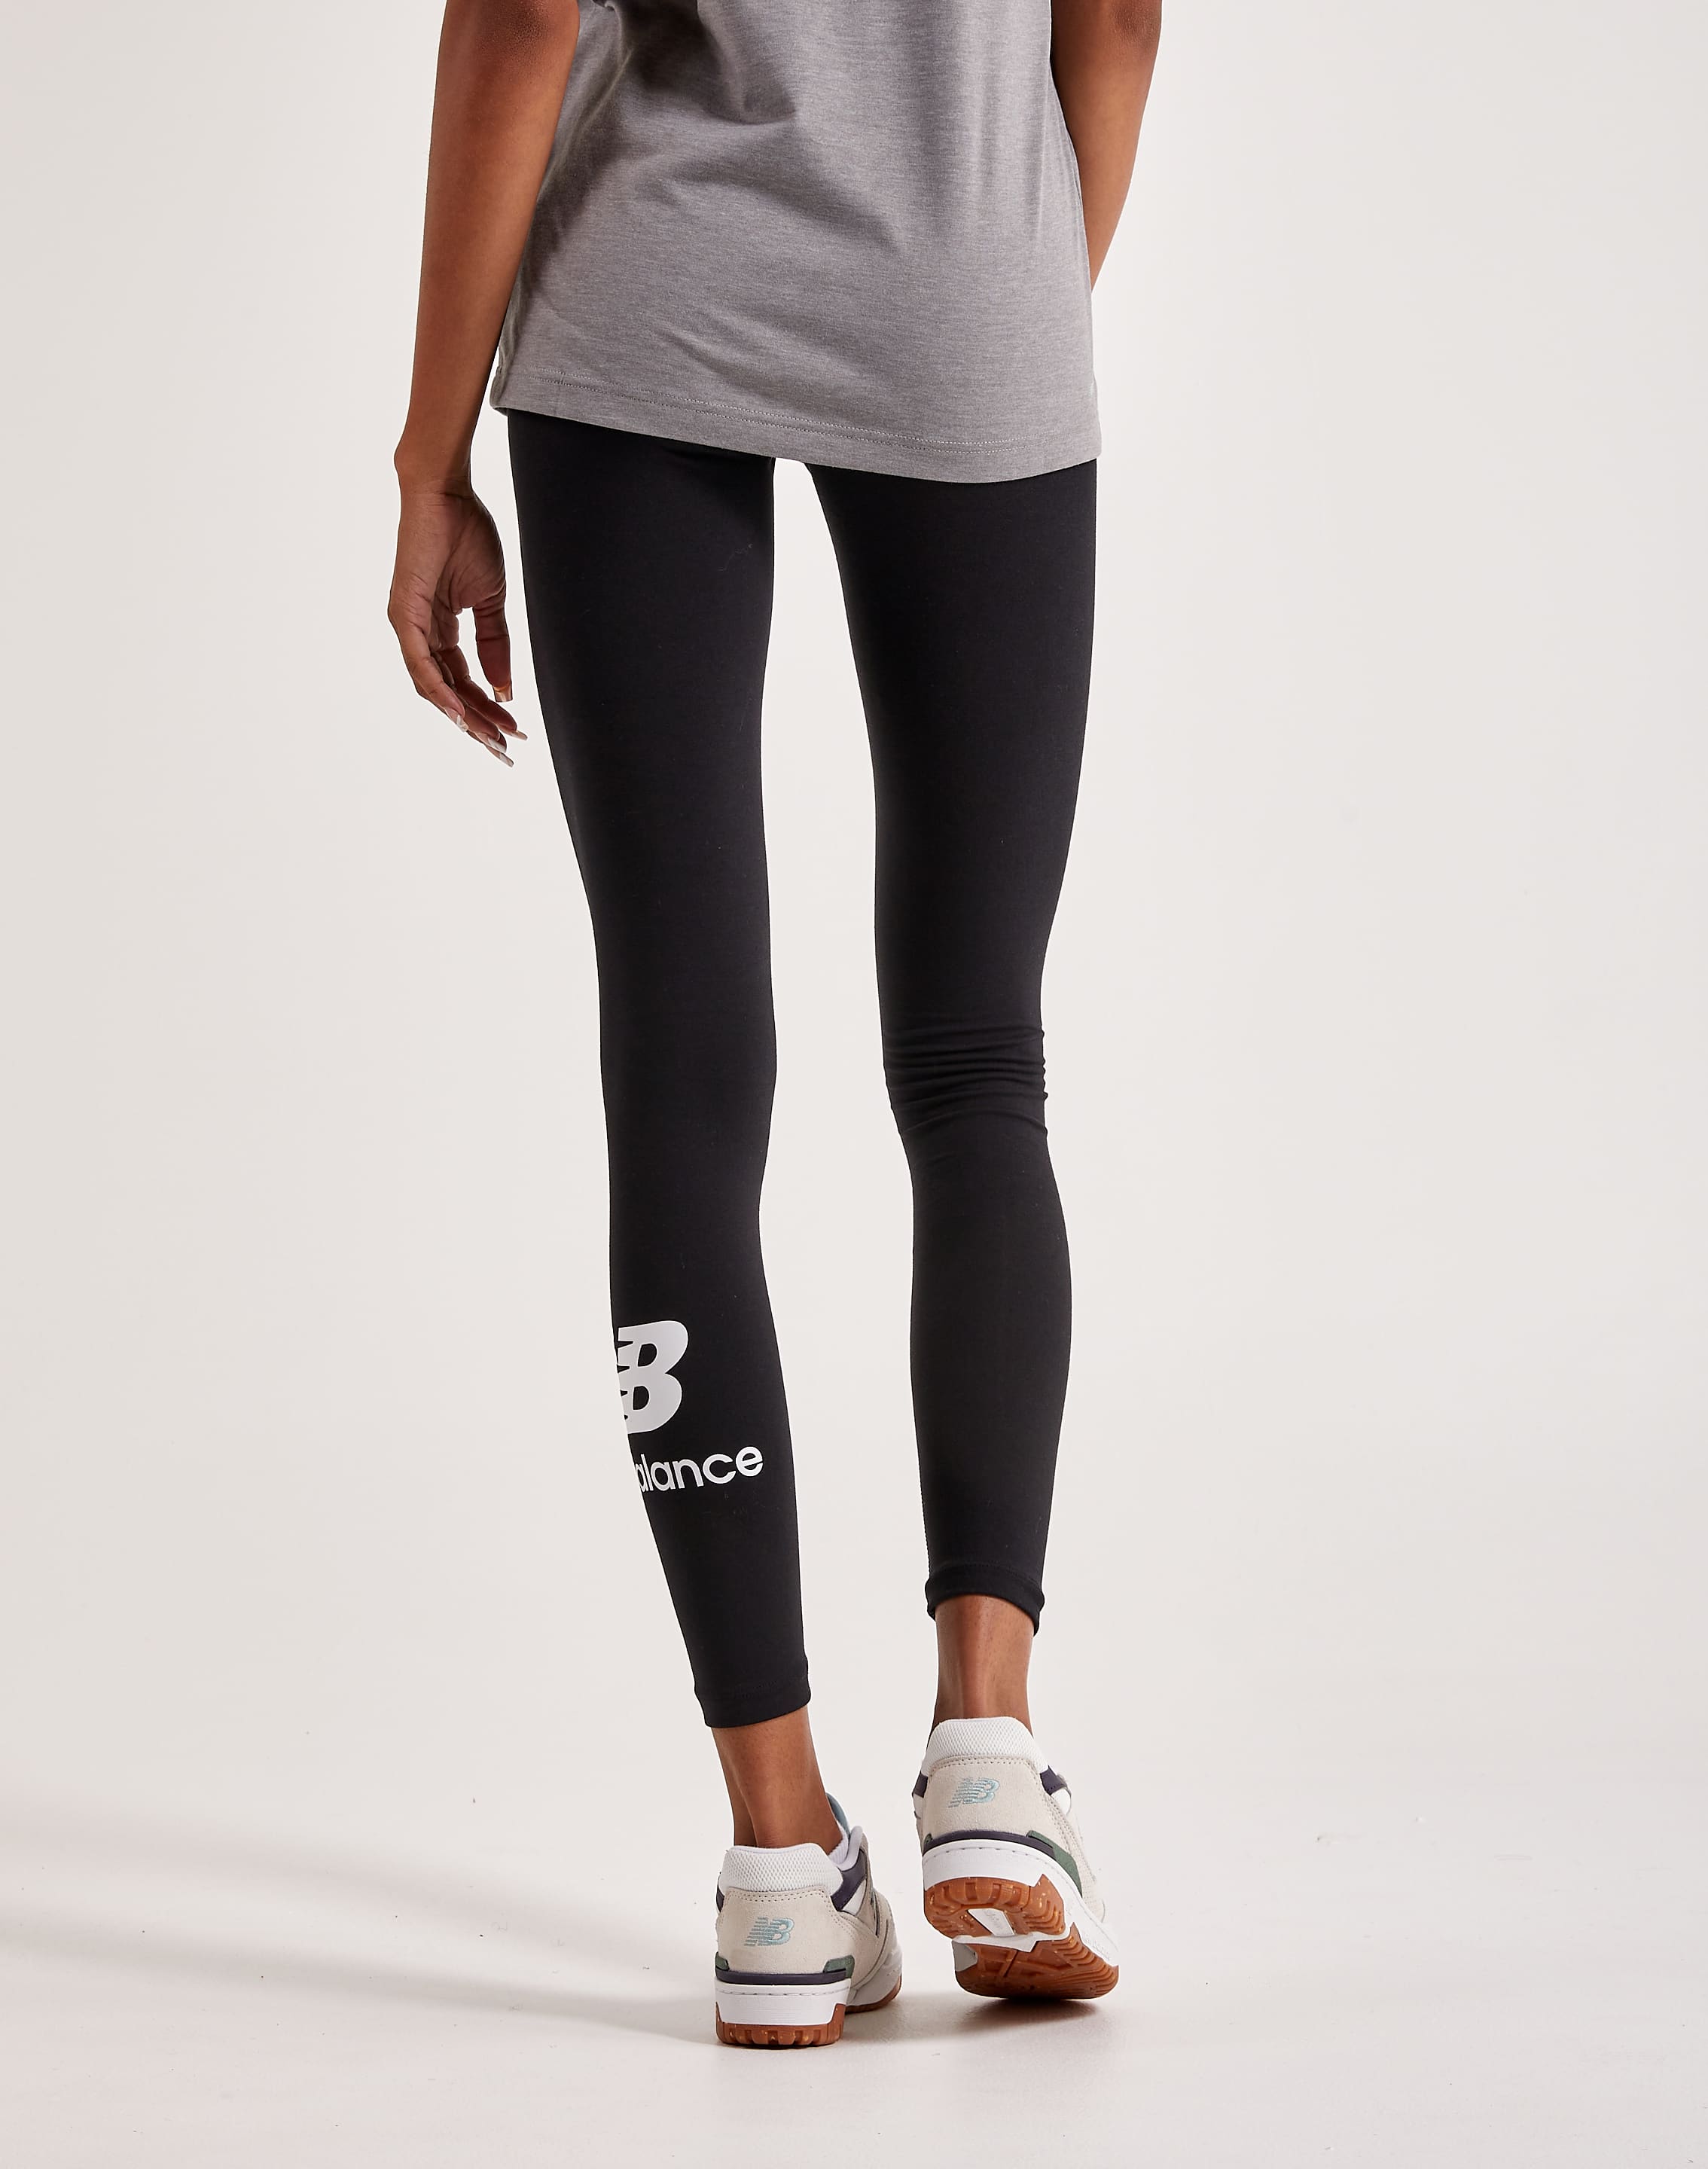 New Balance Essentials – Stacked DTLR Leggings